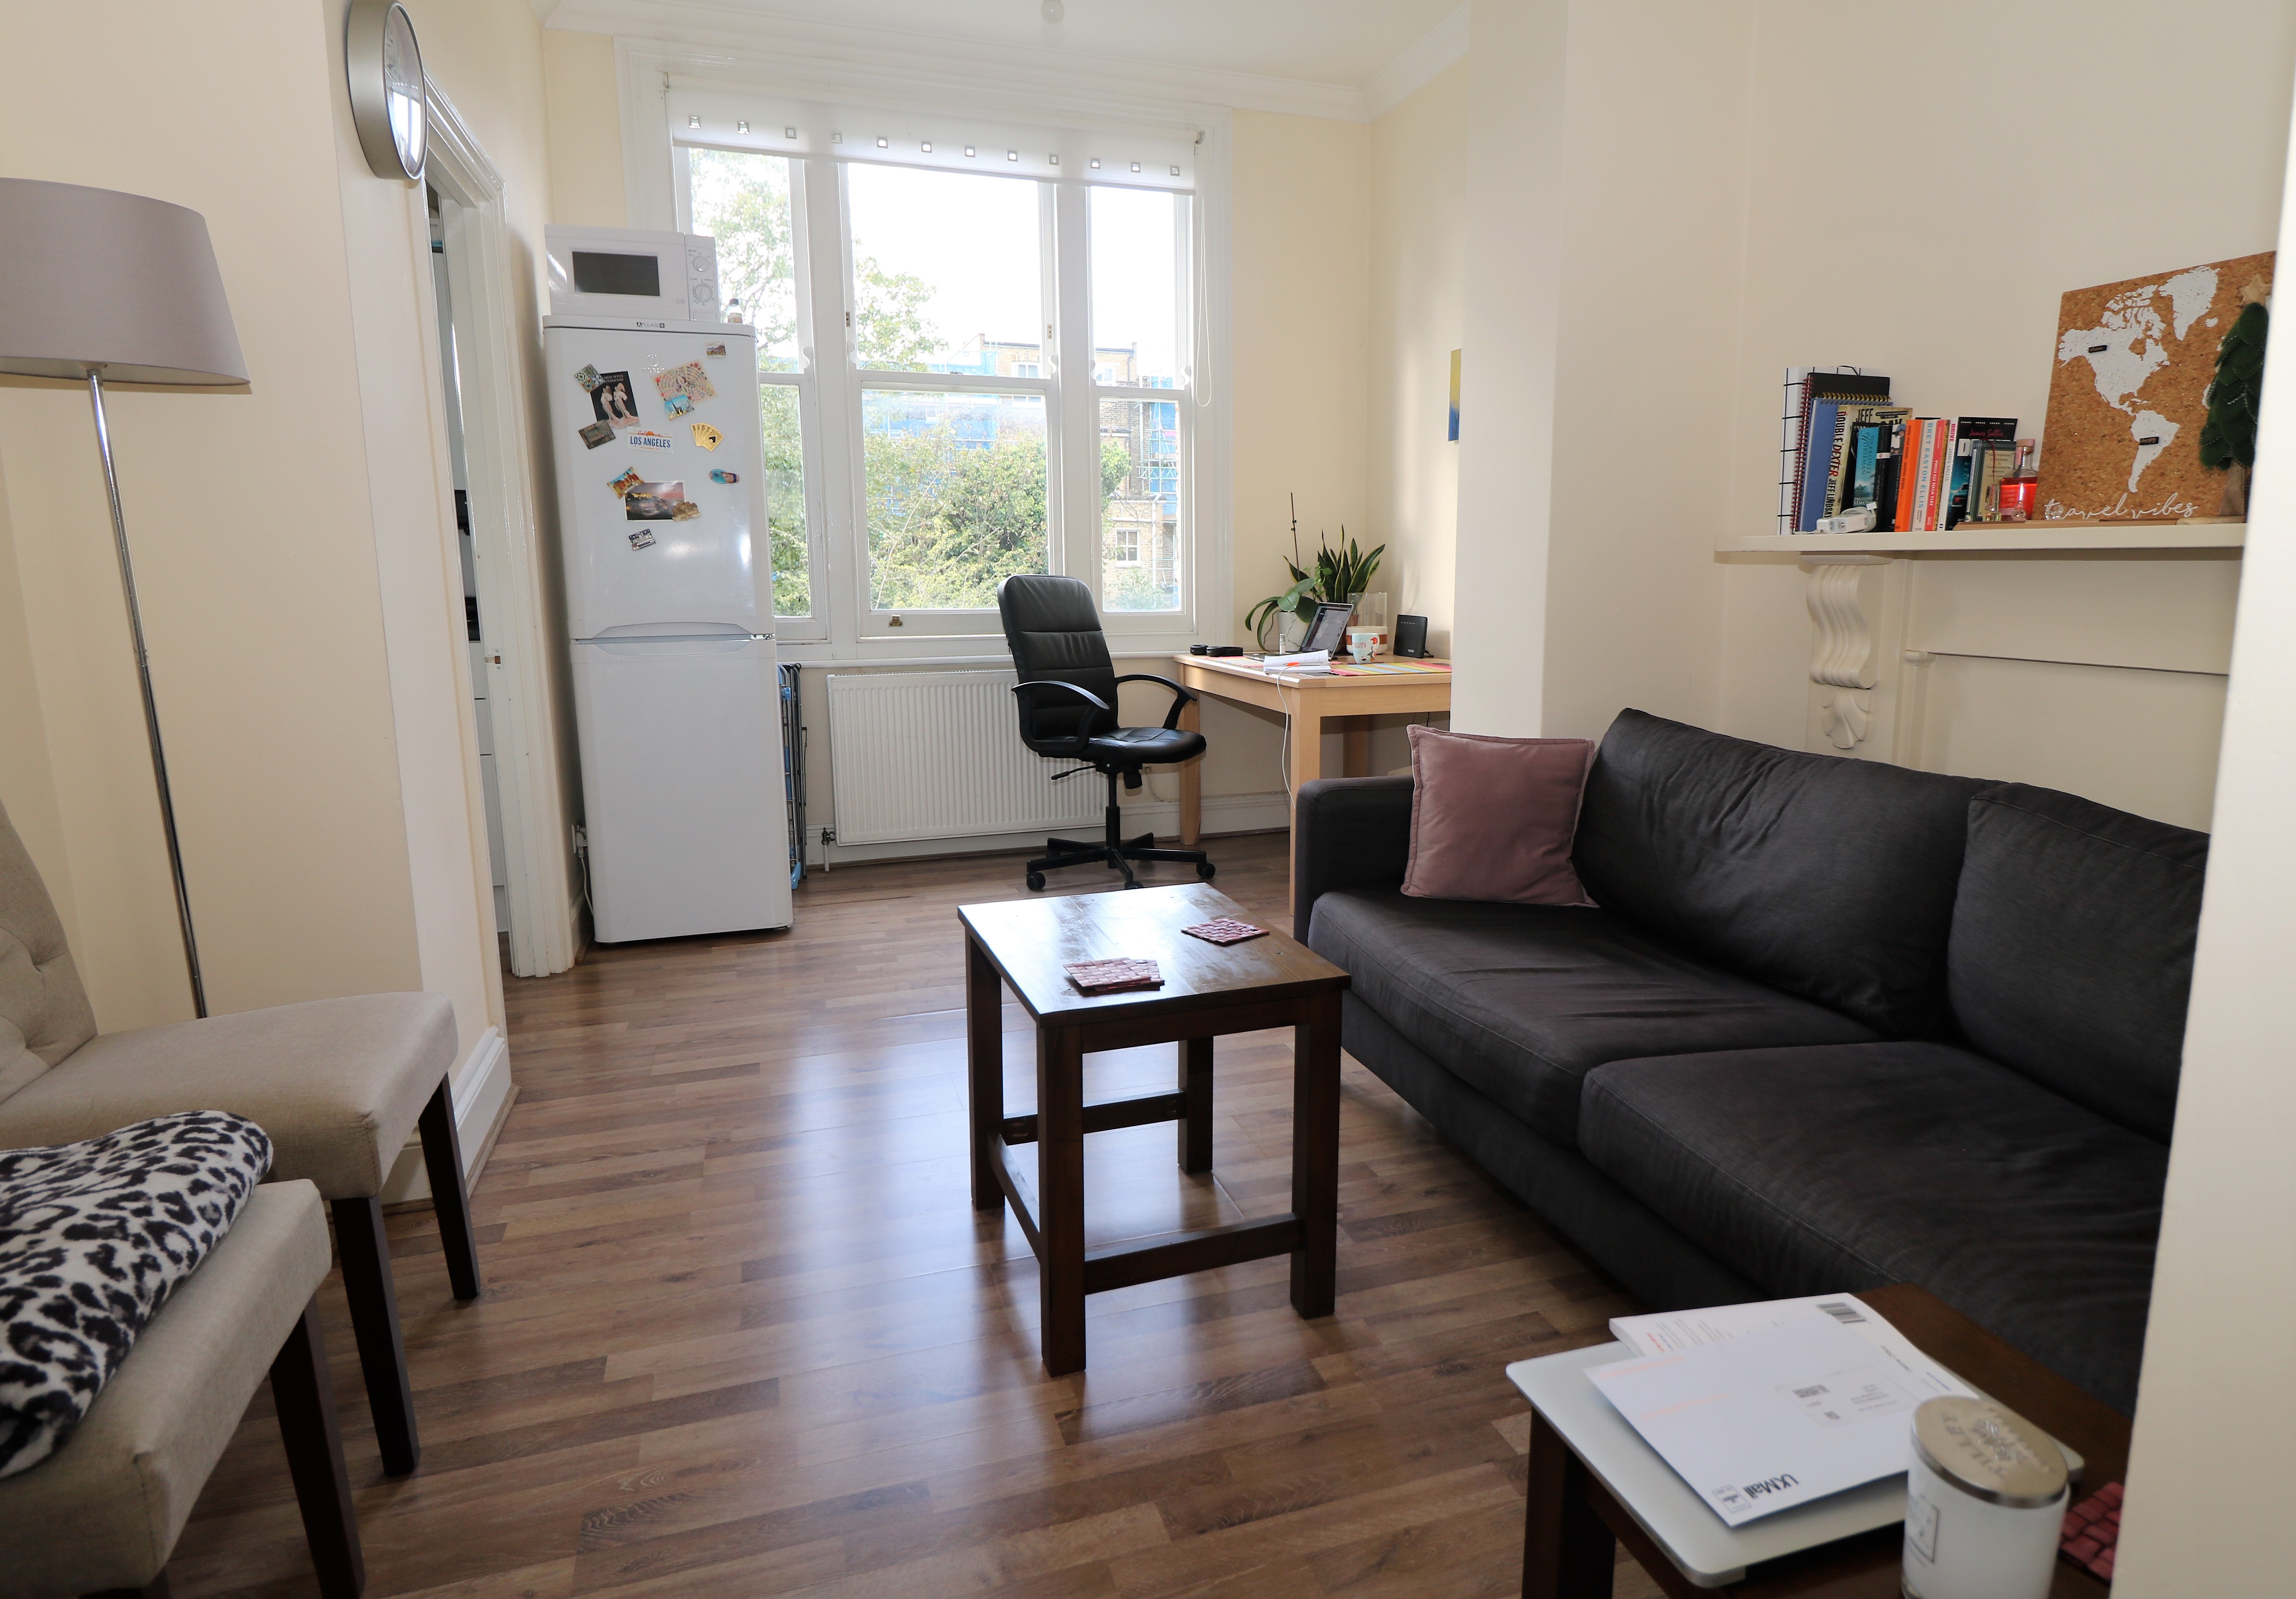 First floor 2 double bedroom flat in Islington, N4. Wood floors, separate lounge and kitchen great condition near zone 2 tube